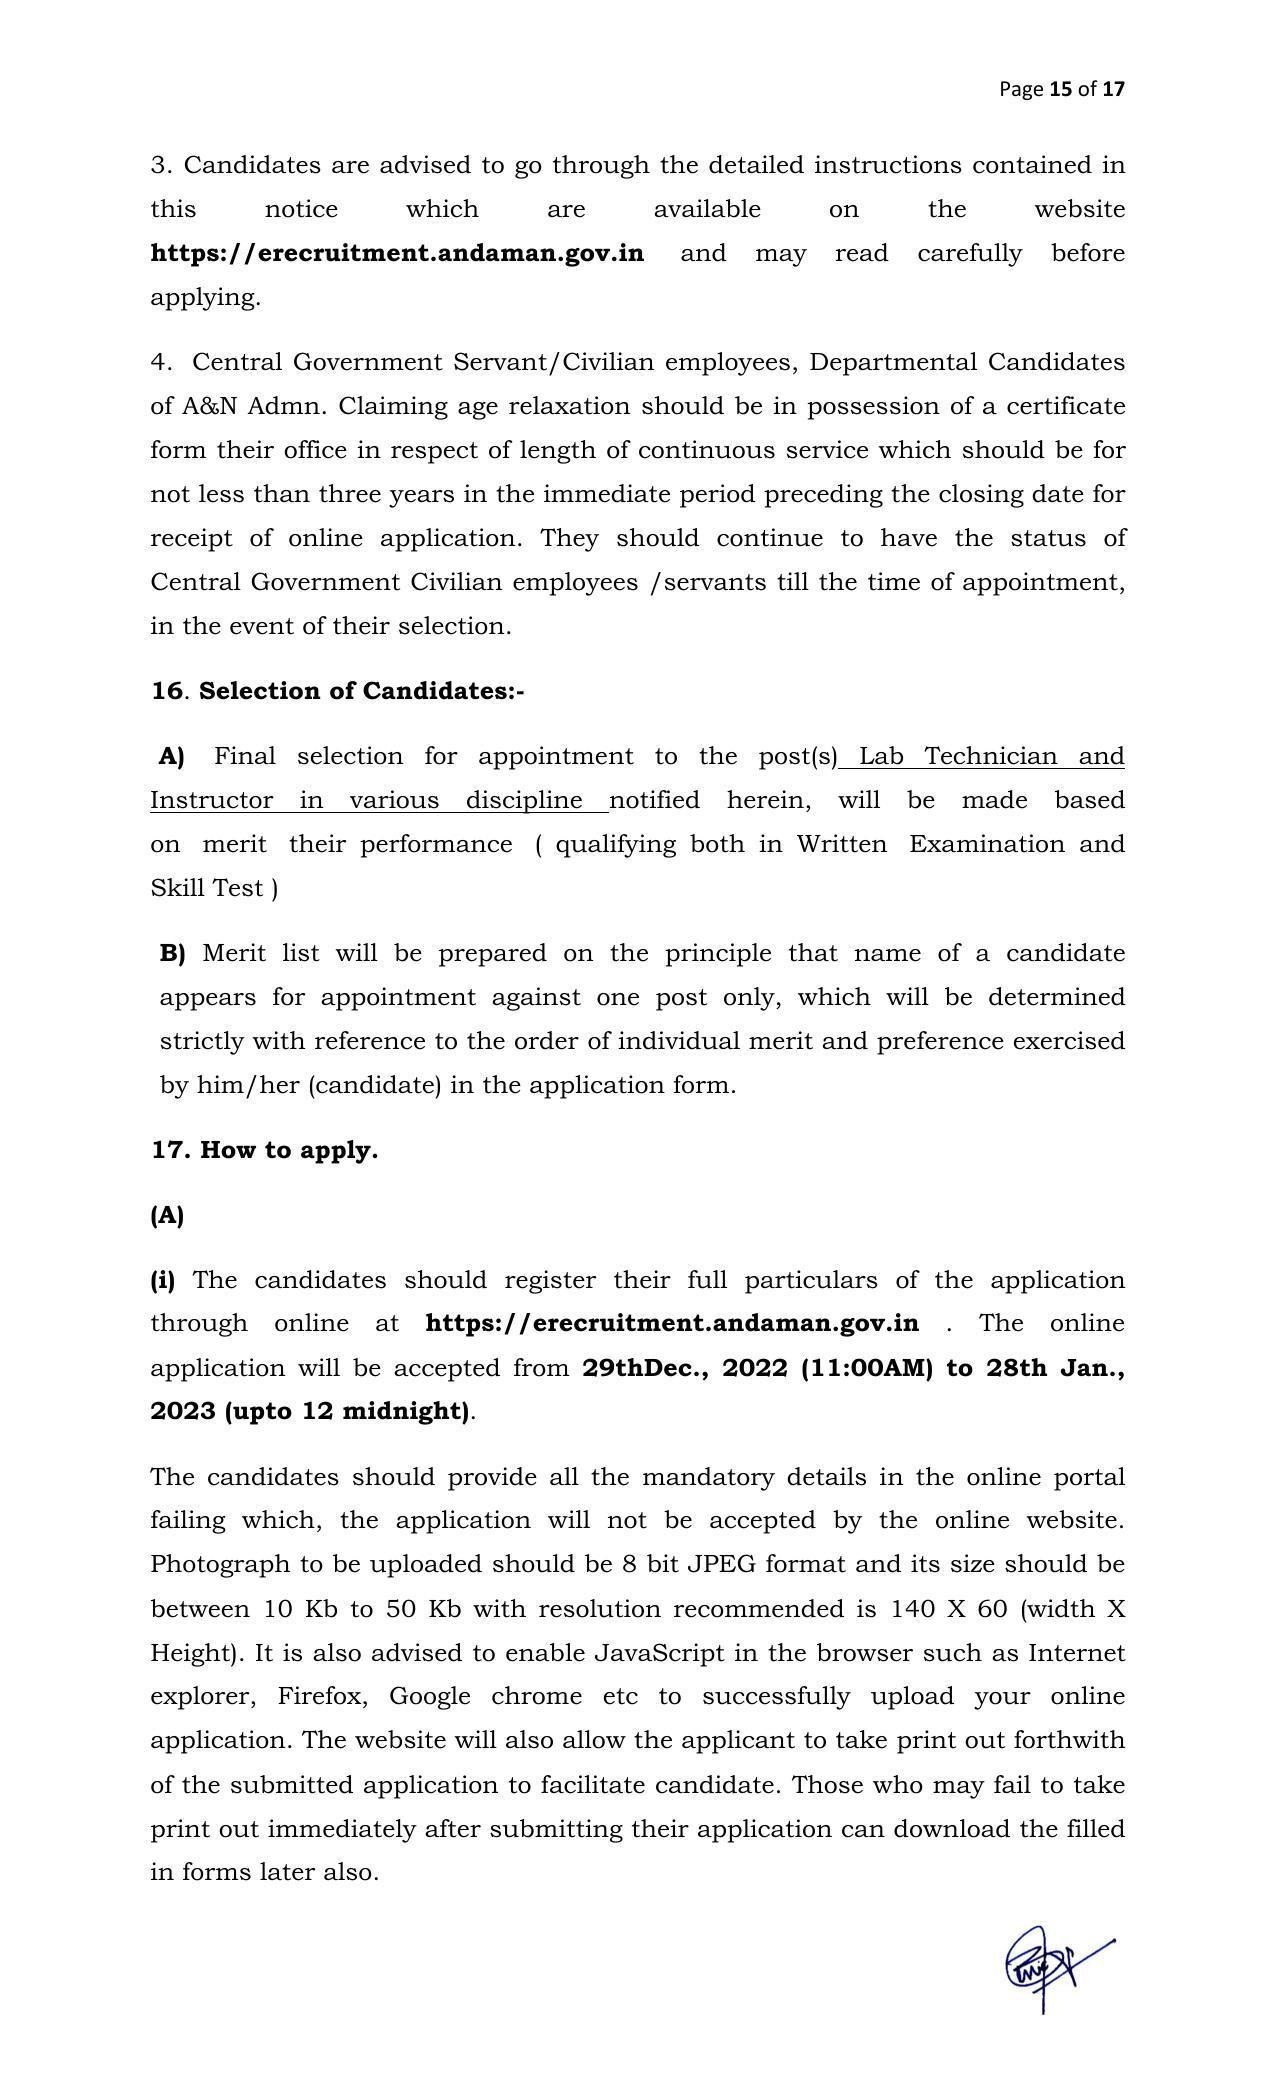 DBRAIT Invites Application for Lab Technician, Instructor Recruitment 2022 - Page 6